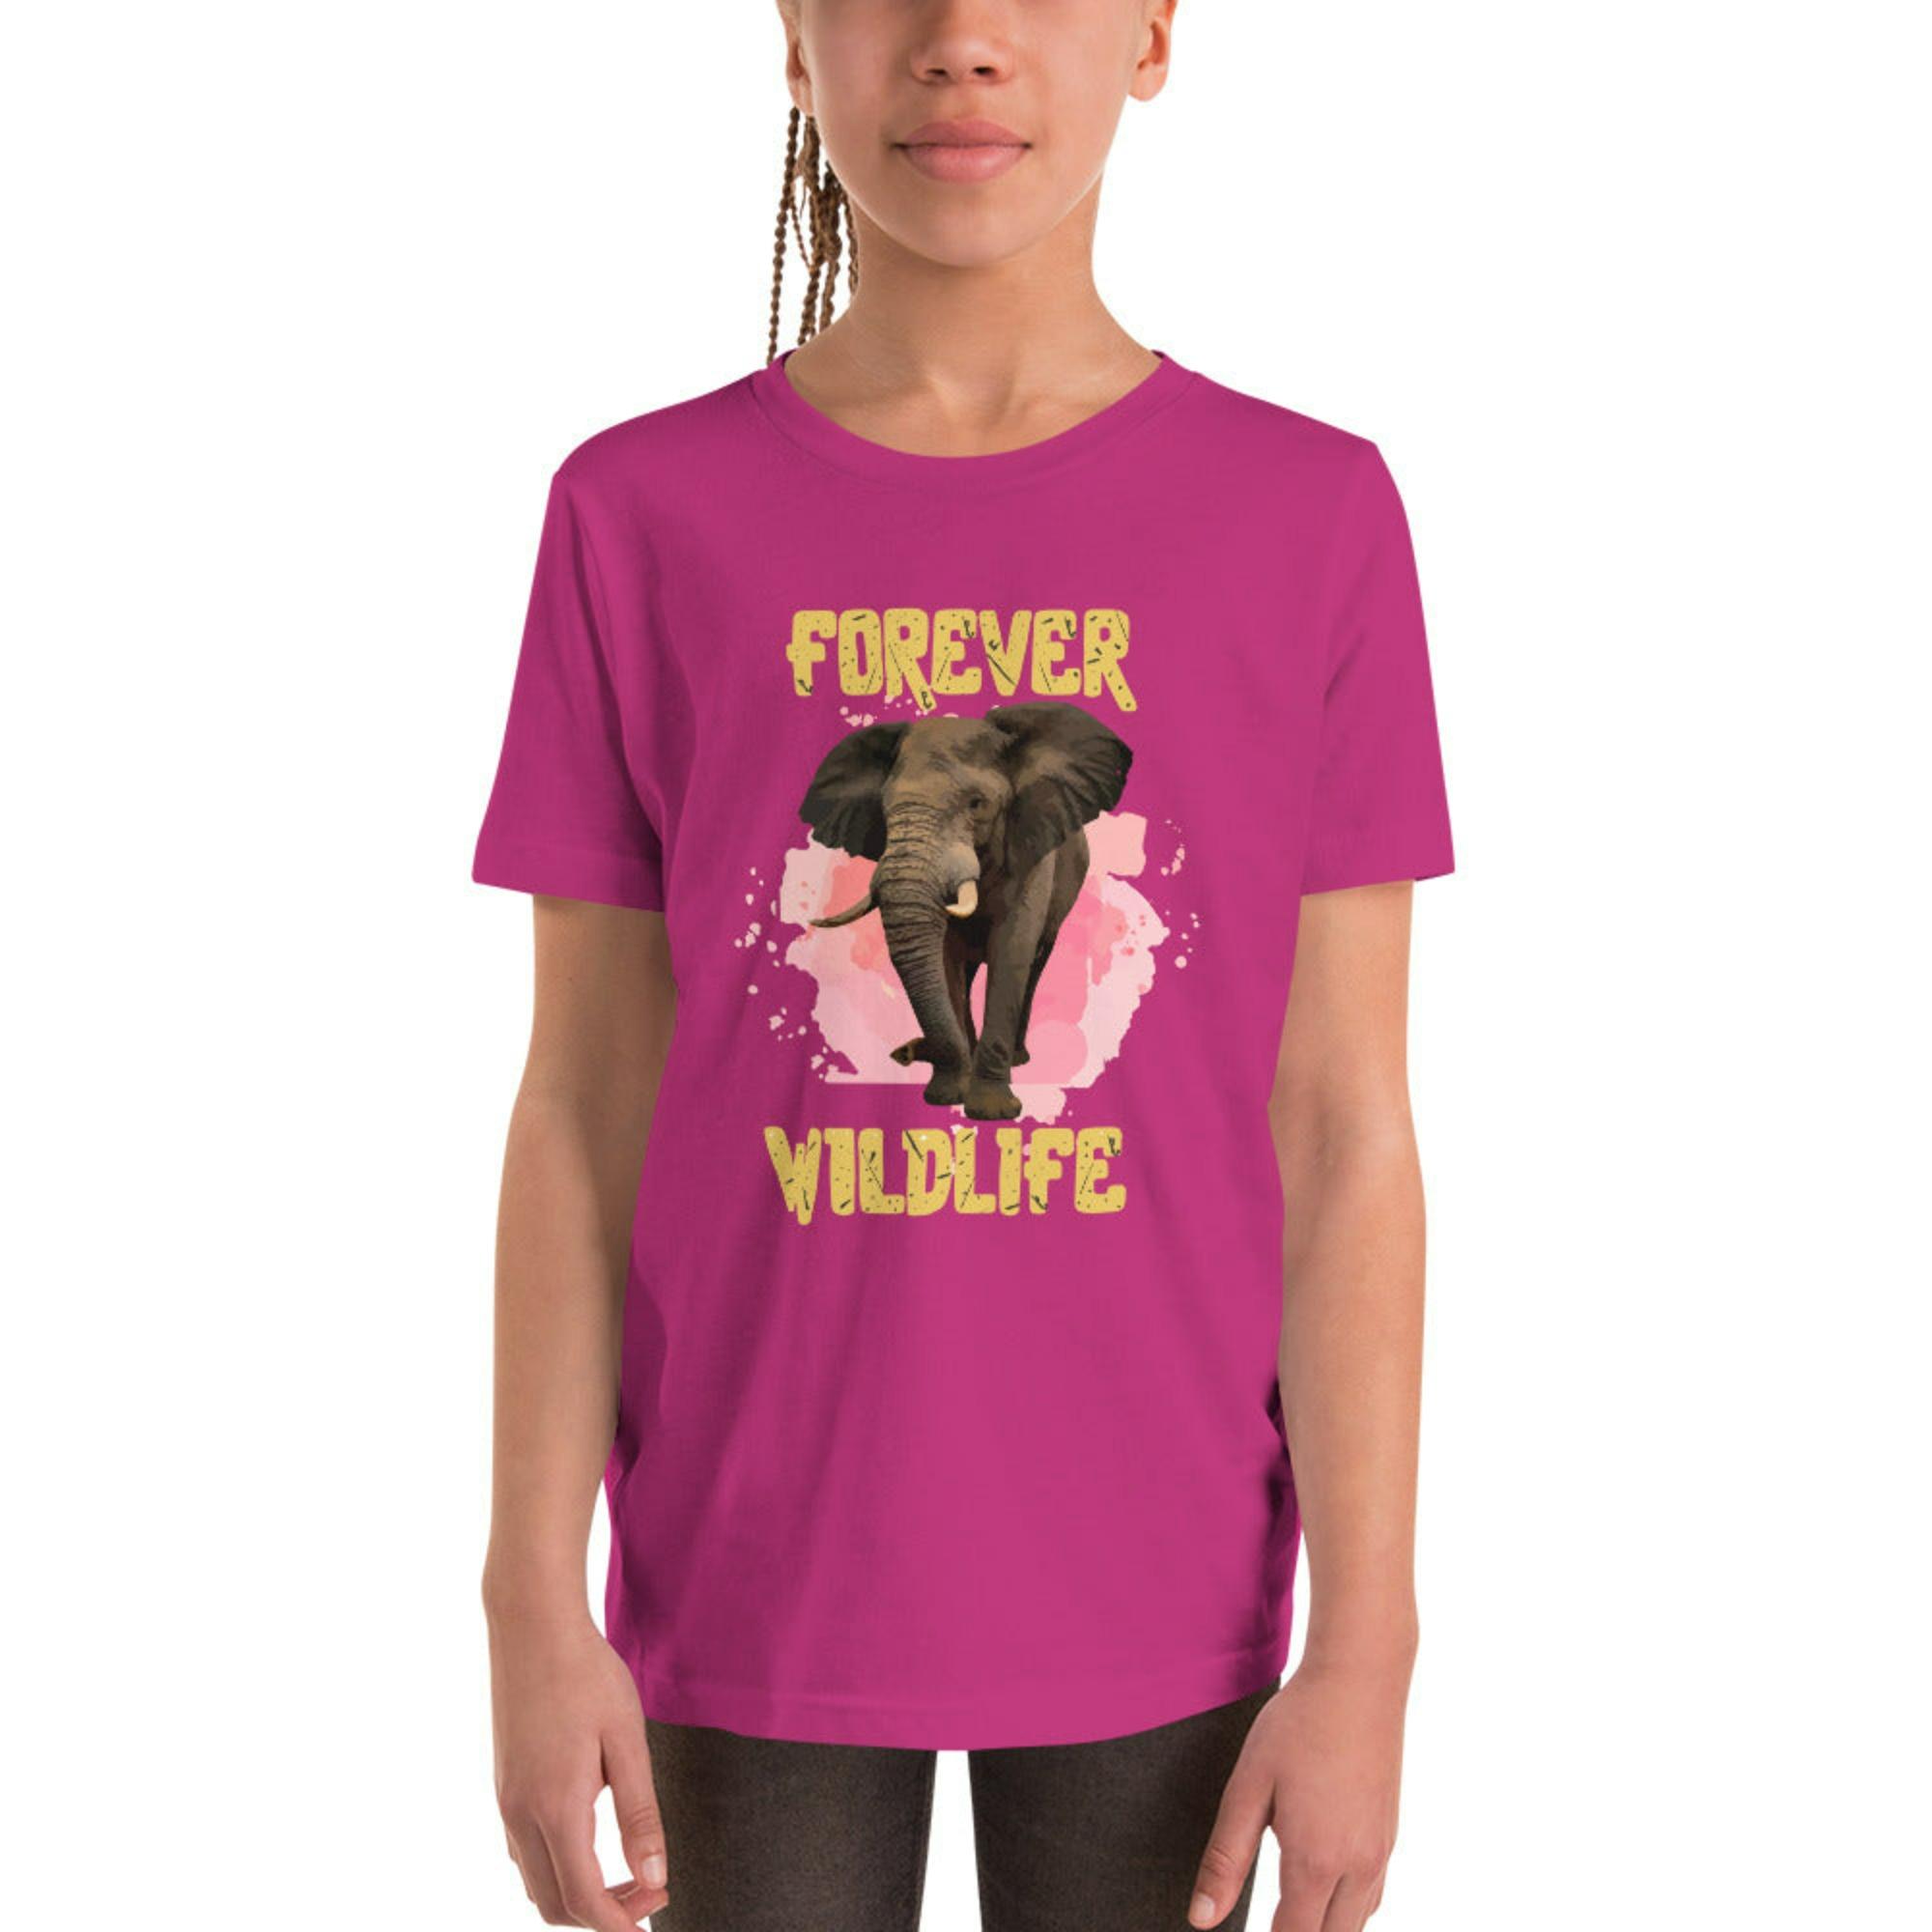 Teen wearing Pink Elephant Youth T-Shirt with Elephant graphic as part of Wildlife T Shirts, Wildlife Clothing & Apparel by Forever Wildlife